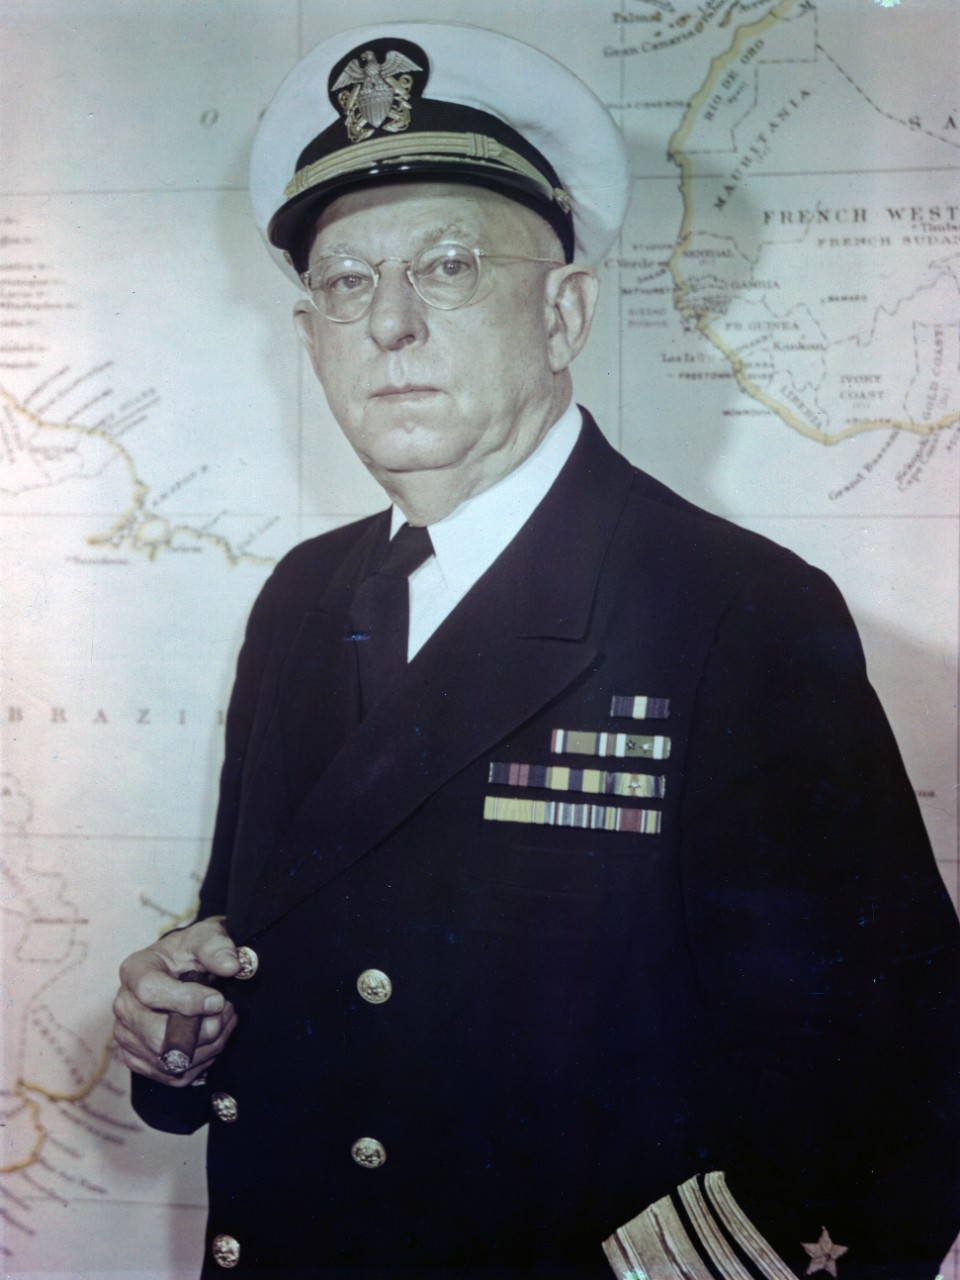 Approximately 300 photos, postcards, and negatives from the career of Vice Admiral Harold Bowen Sr. (1883-1965), who served as head of the Naval Research Laboratory and the Office of Naval Research. Originally donated by Bowen to the Naval Historical Foundation, and subsequently donated to the Naval History and Heritage Command. There are a few photos of his early life and career, but the preponderance of material is from his time as a flag officer. There are a significant number of posed portraits, as well as award ceremonies, meetings, and public events. A small selection of images show ship christenings and launchings. Some photos have been assigned NH numbers or were removed to the NH collection.